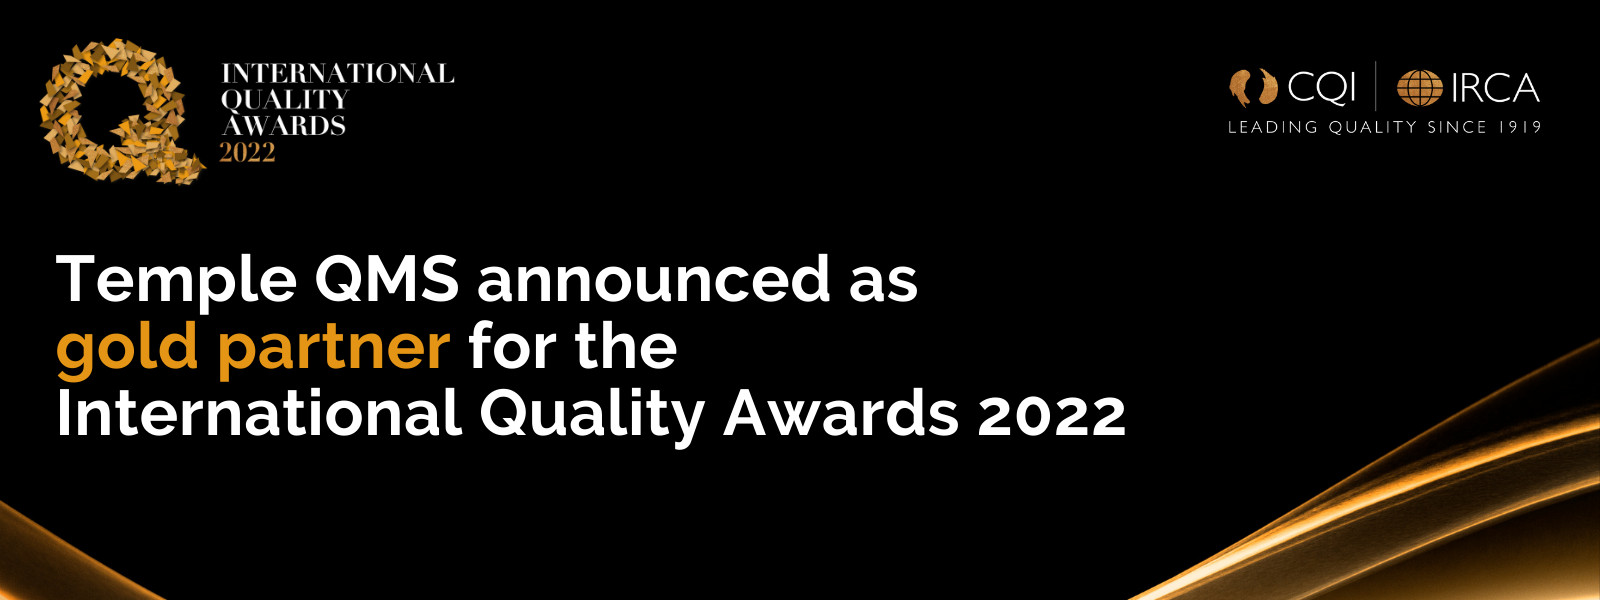 Temple QMS announced as gold partner for the International Quality Awards 2022